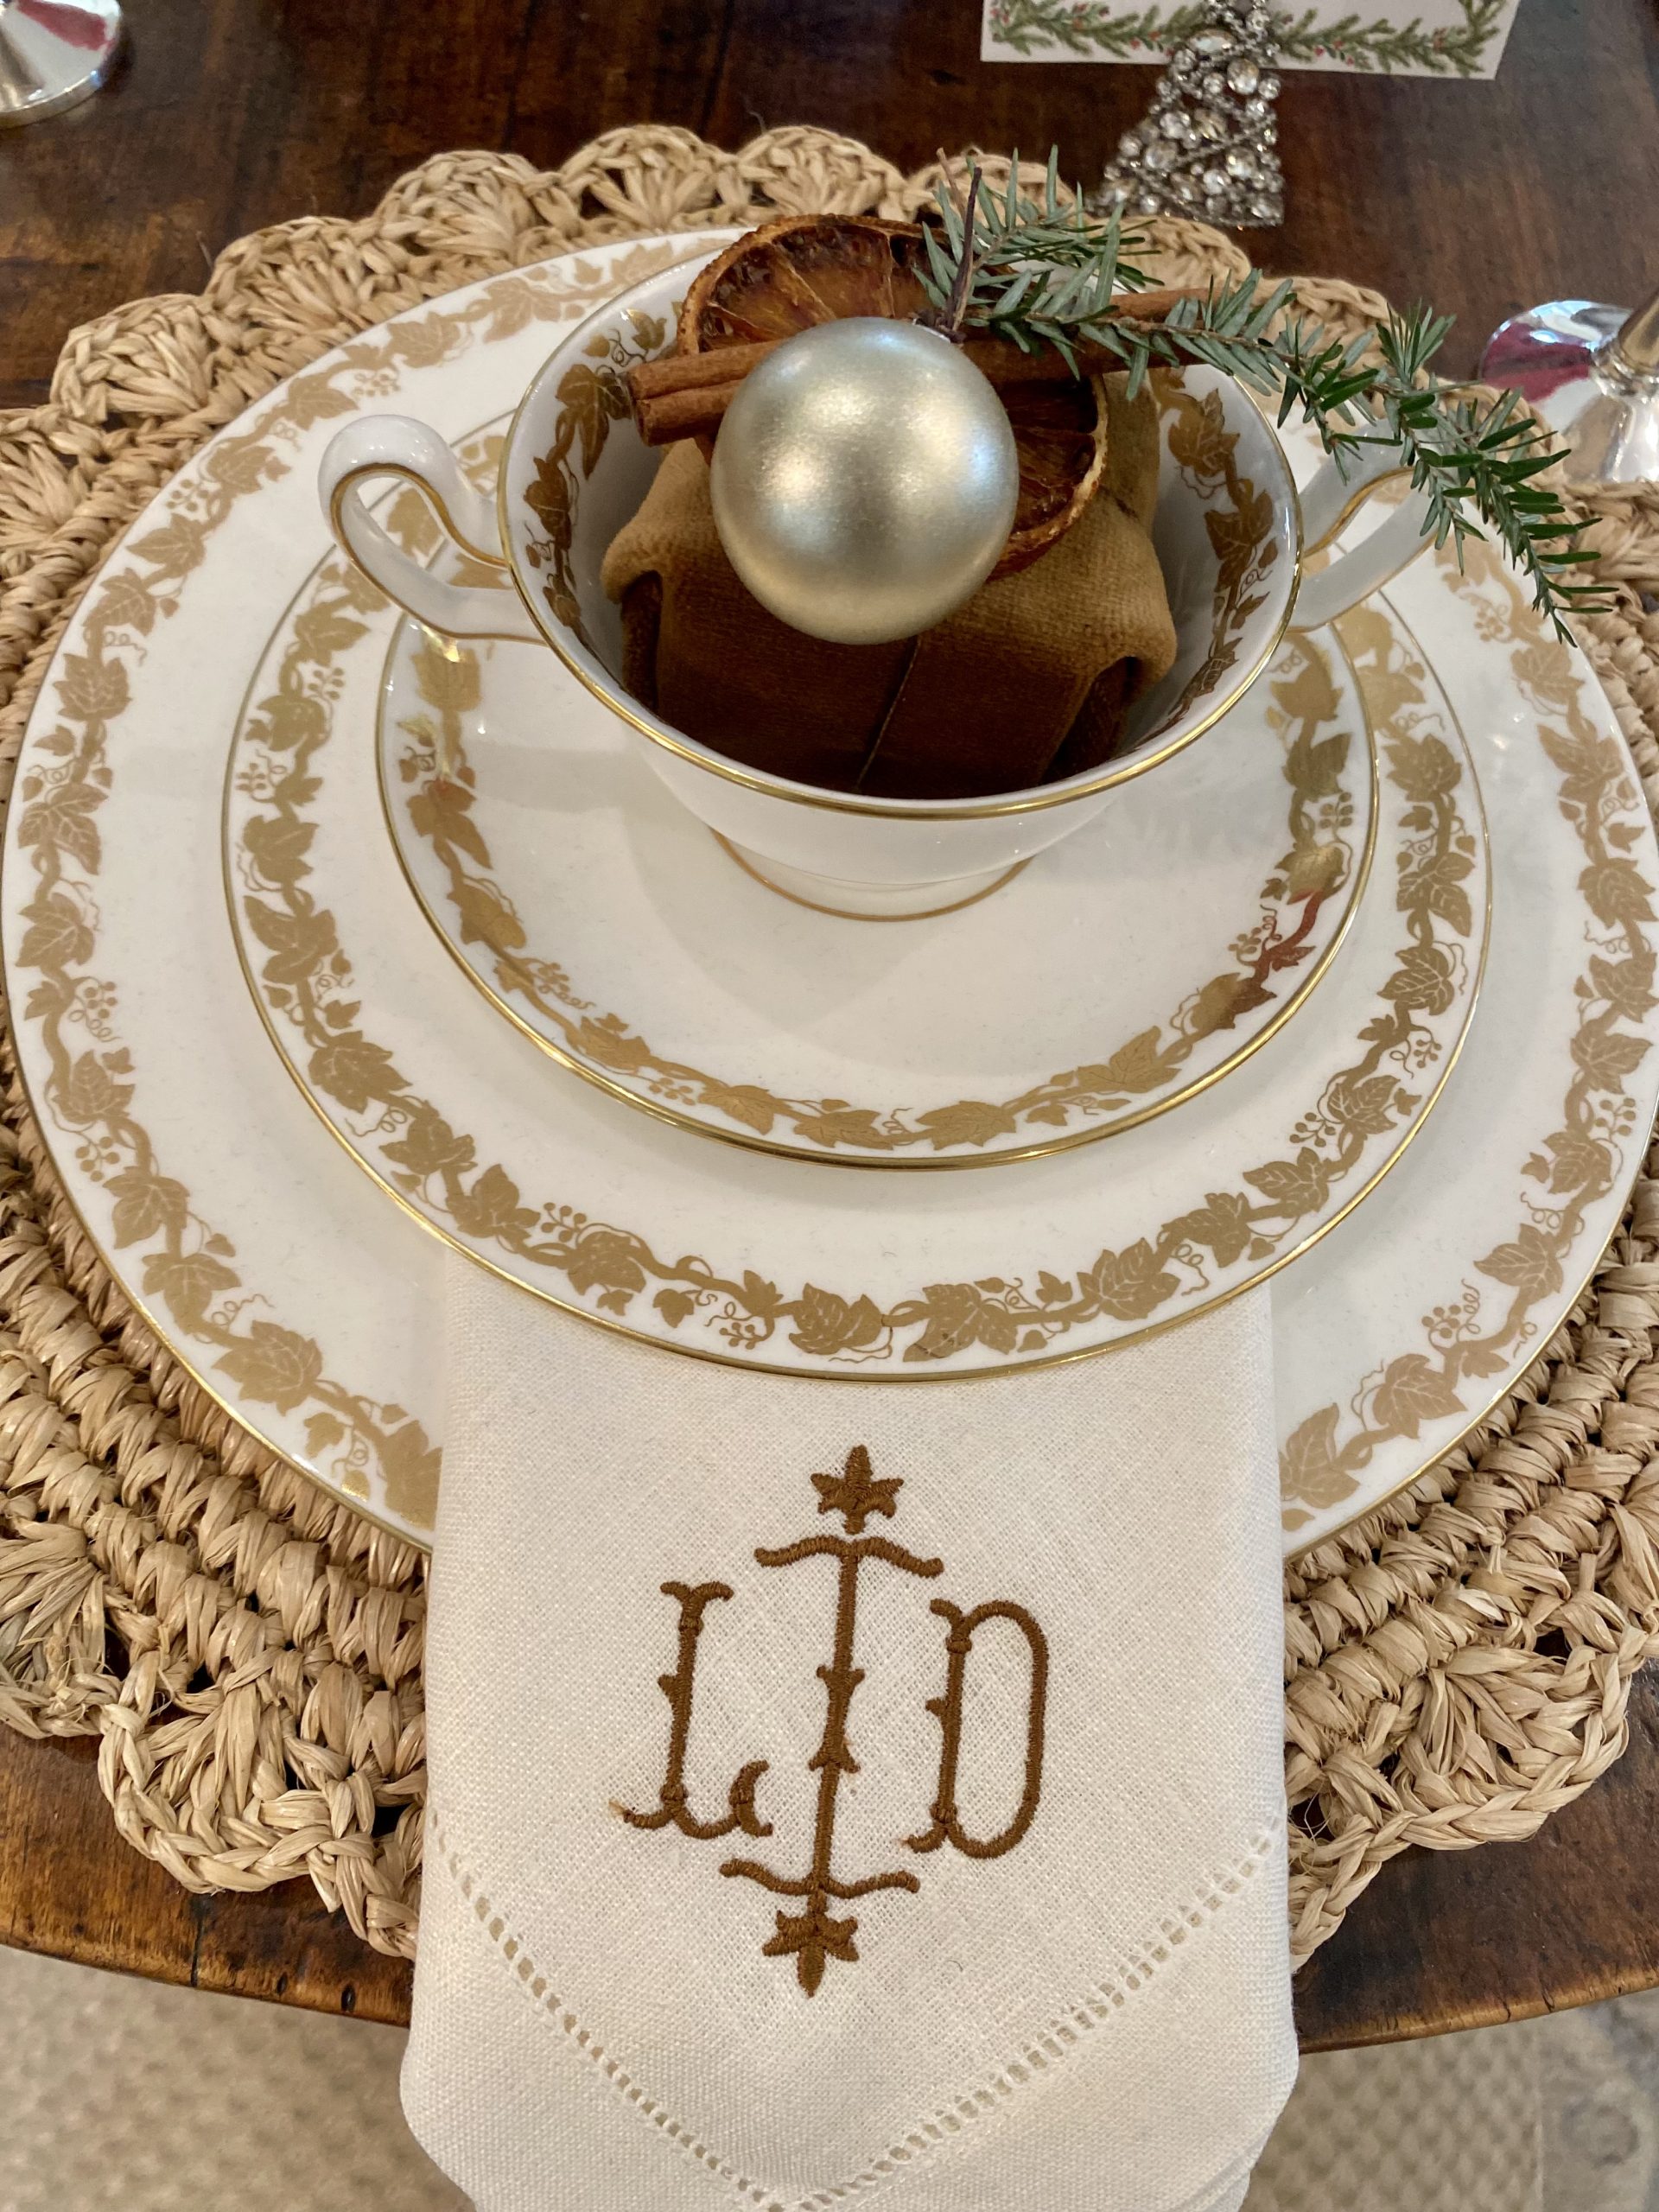 Three Festive Tablescapes For The Holiday & Tips For The Perfect